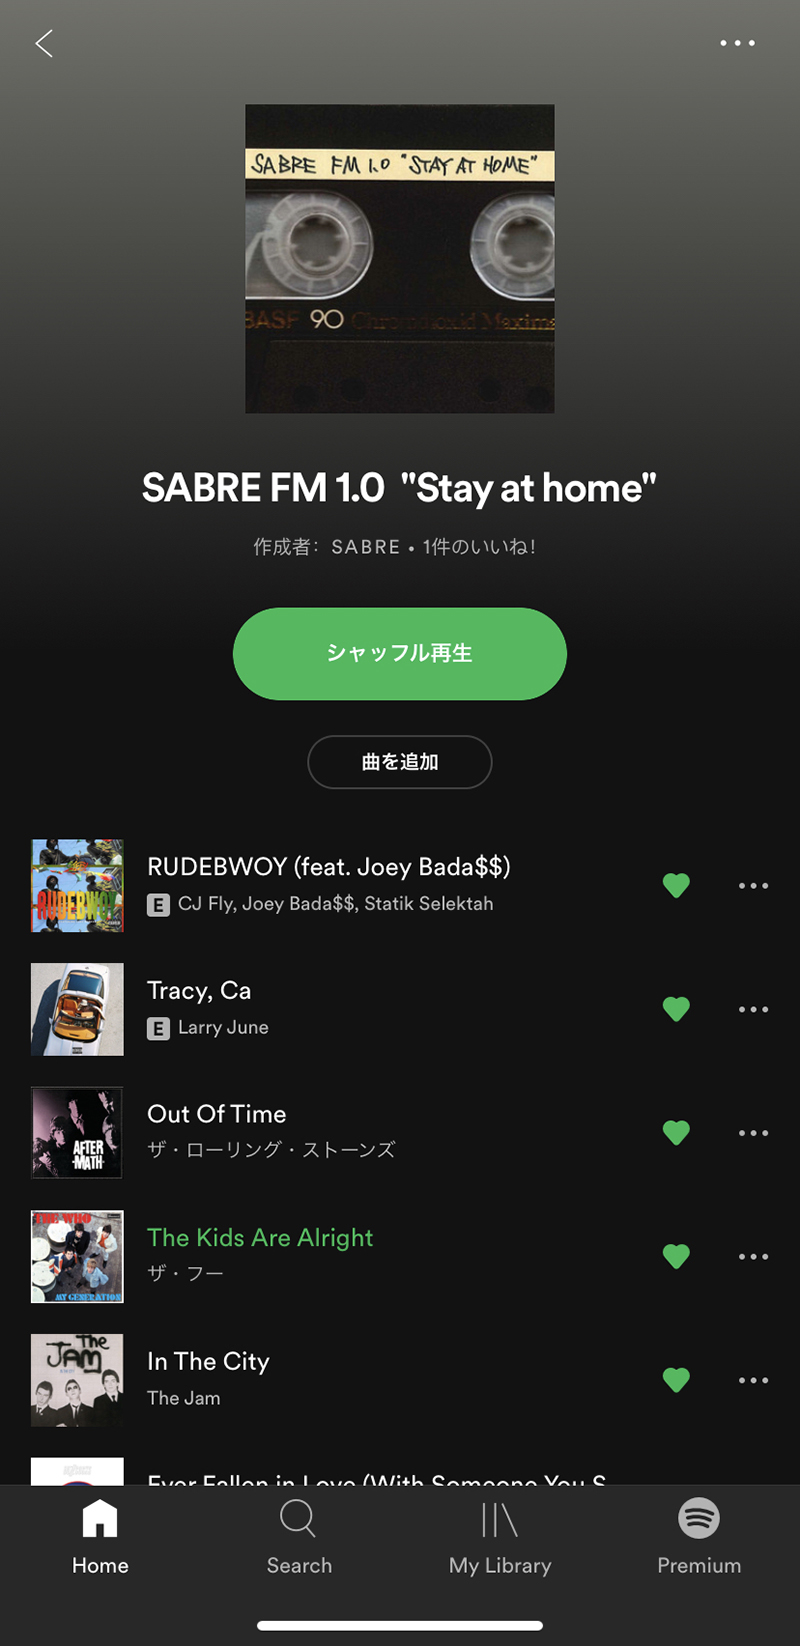 SABRE FM1.0 “Stay at Home”